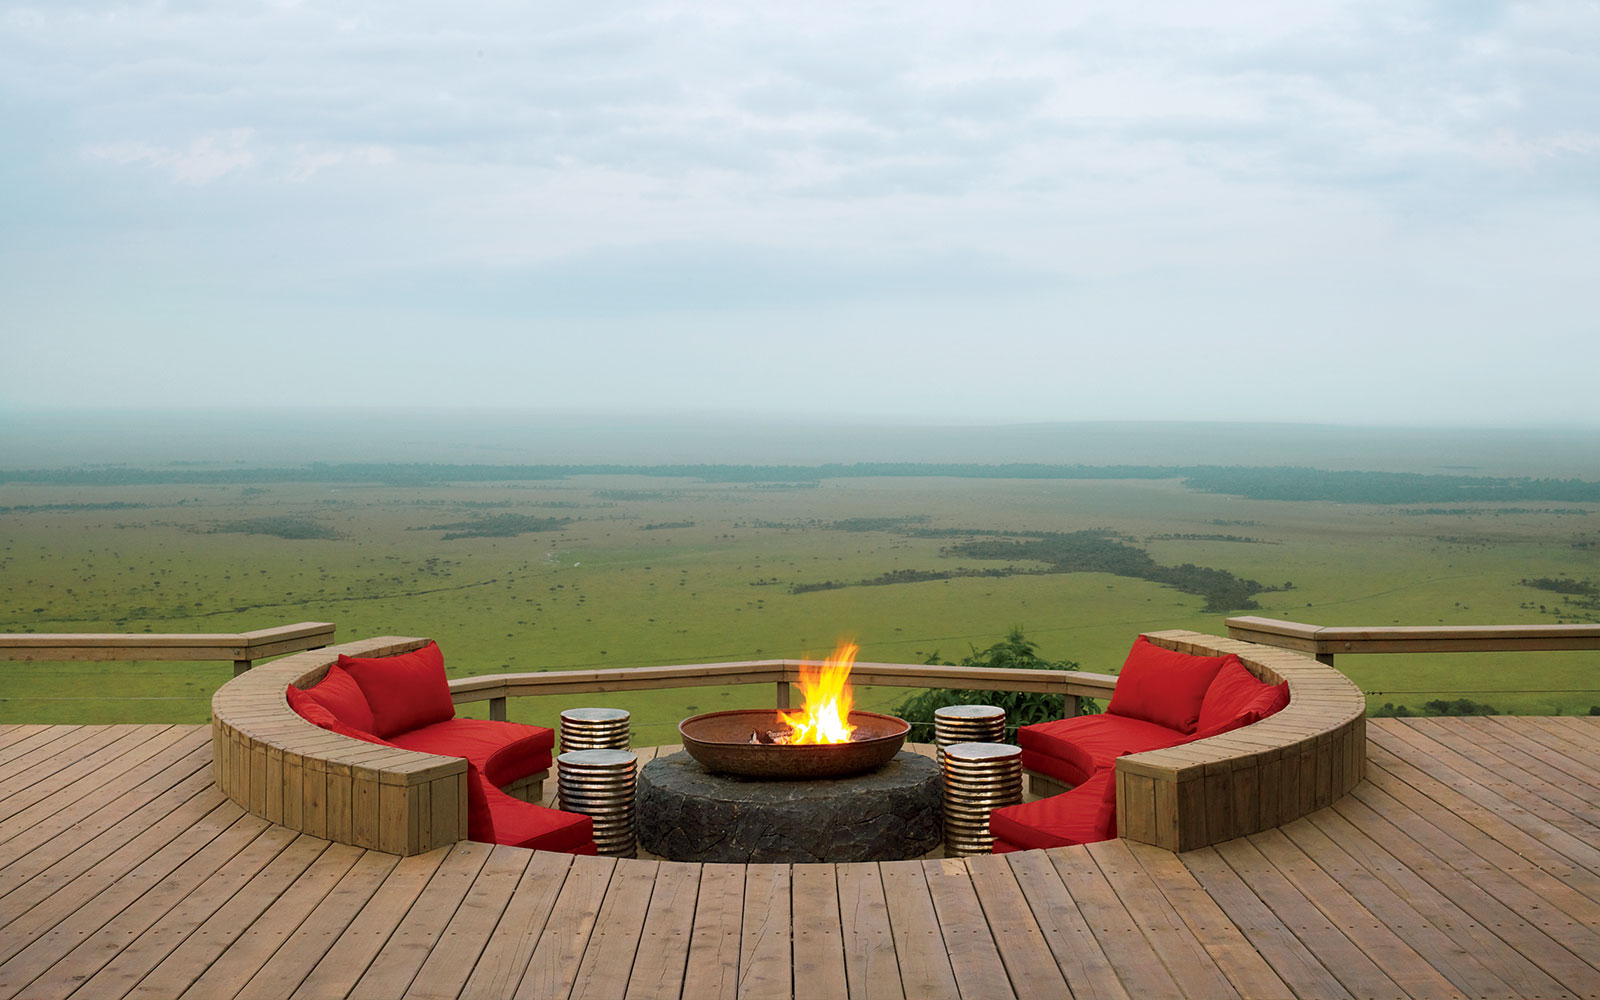 The Barazza at Angama Mara’s guest area where guests can sit and enjoy the view